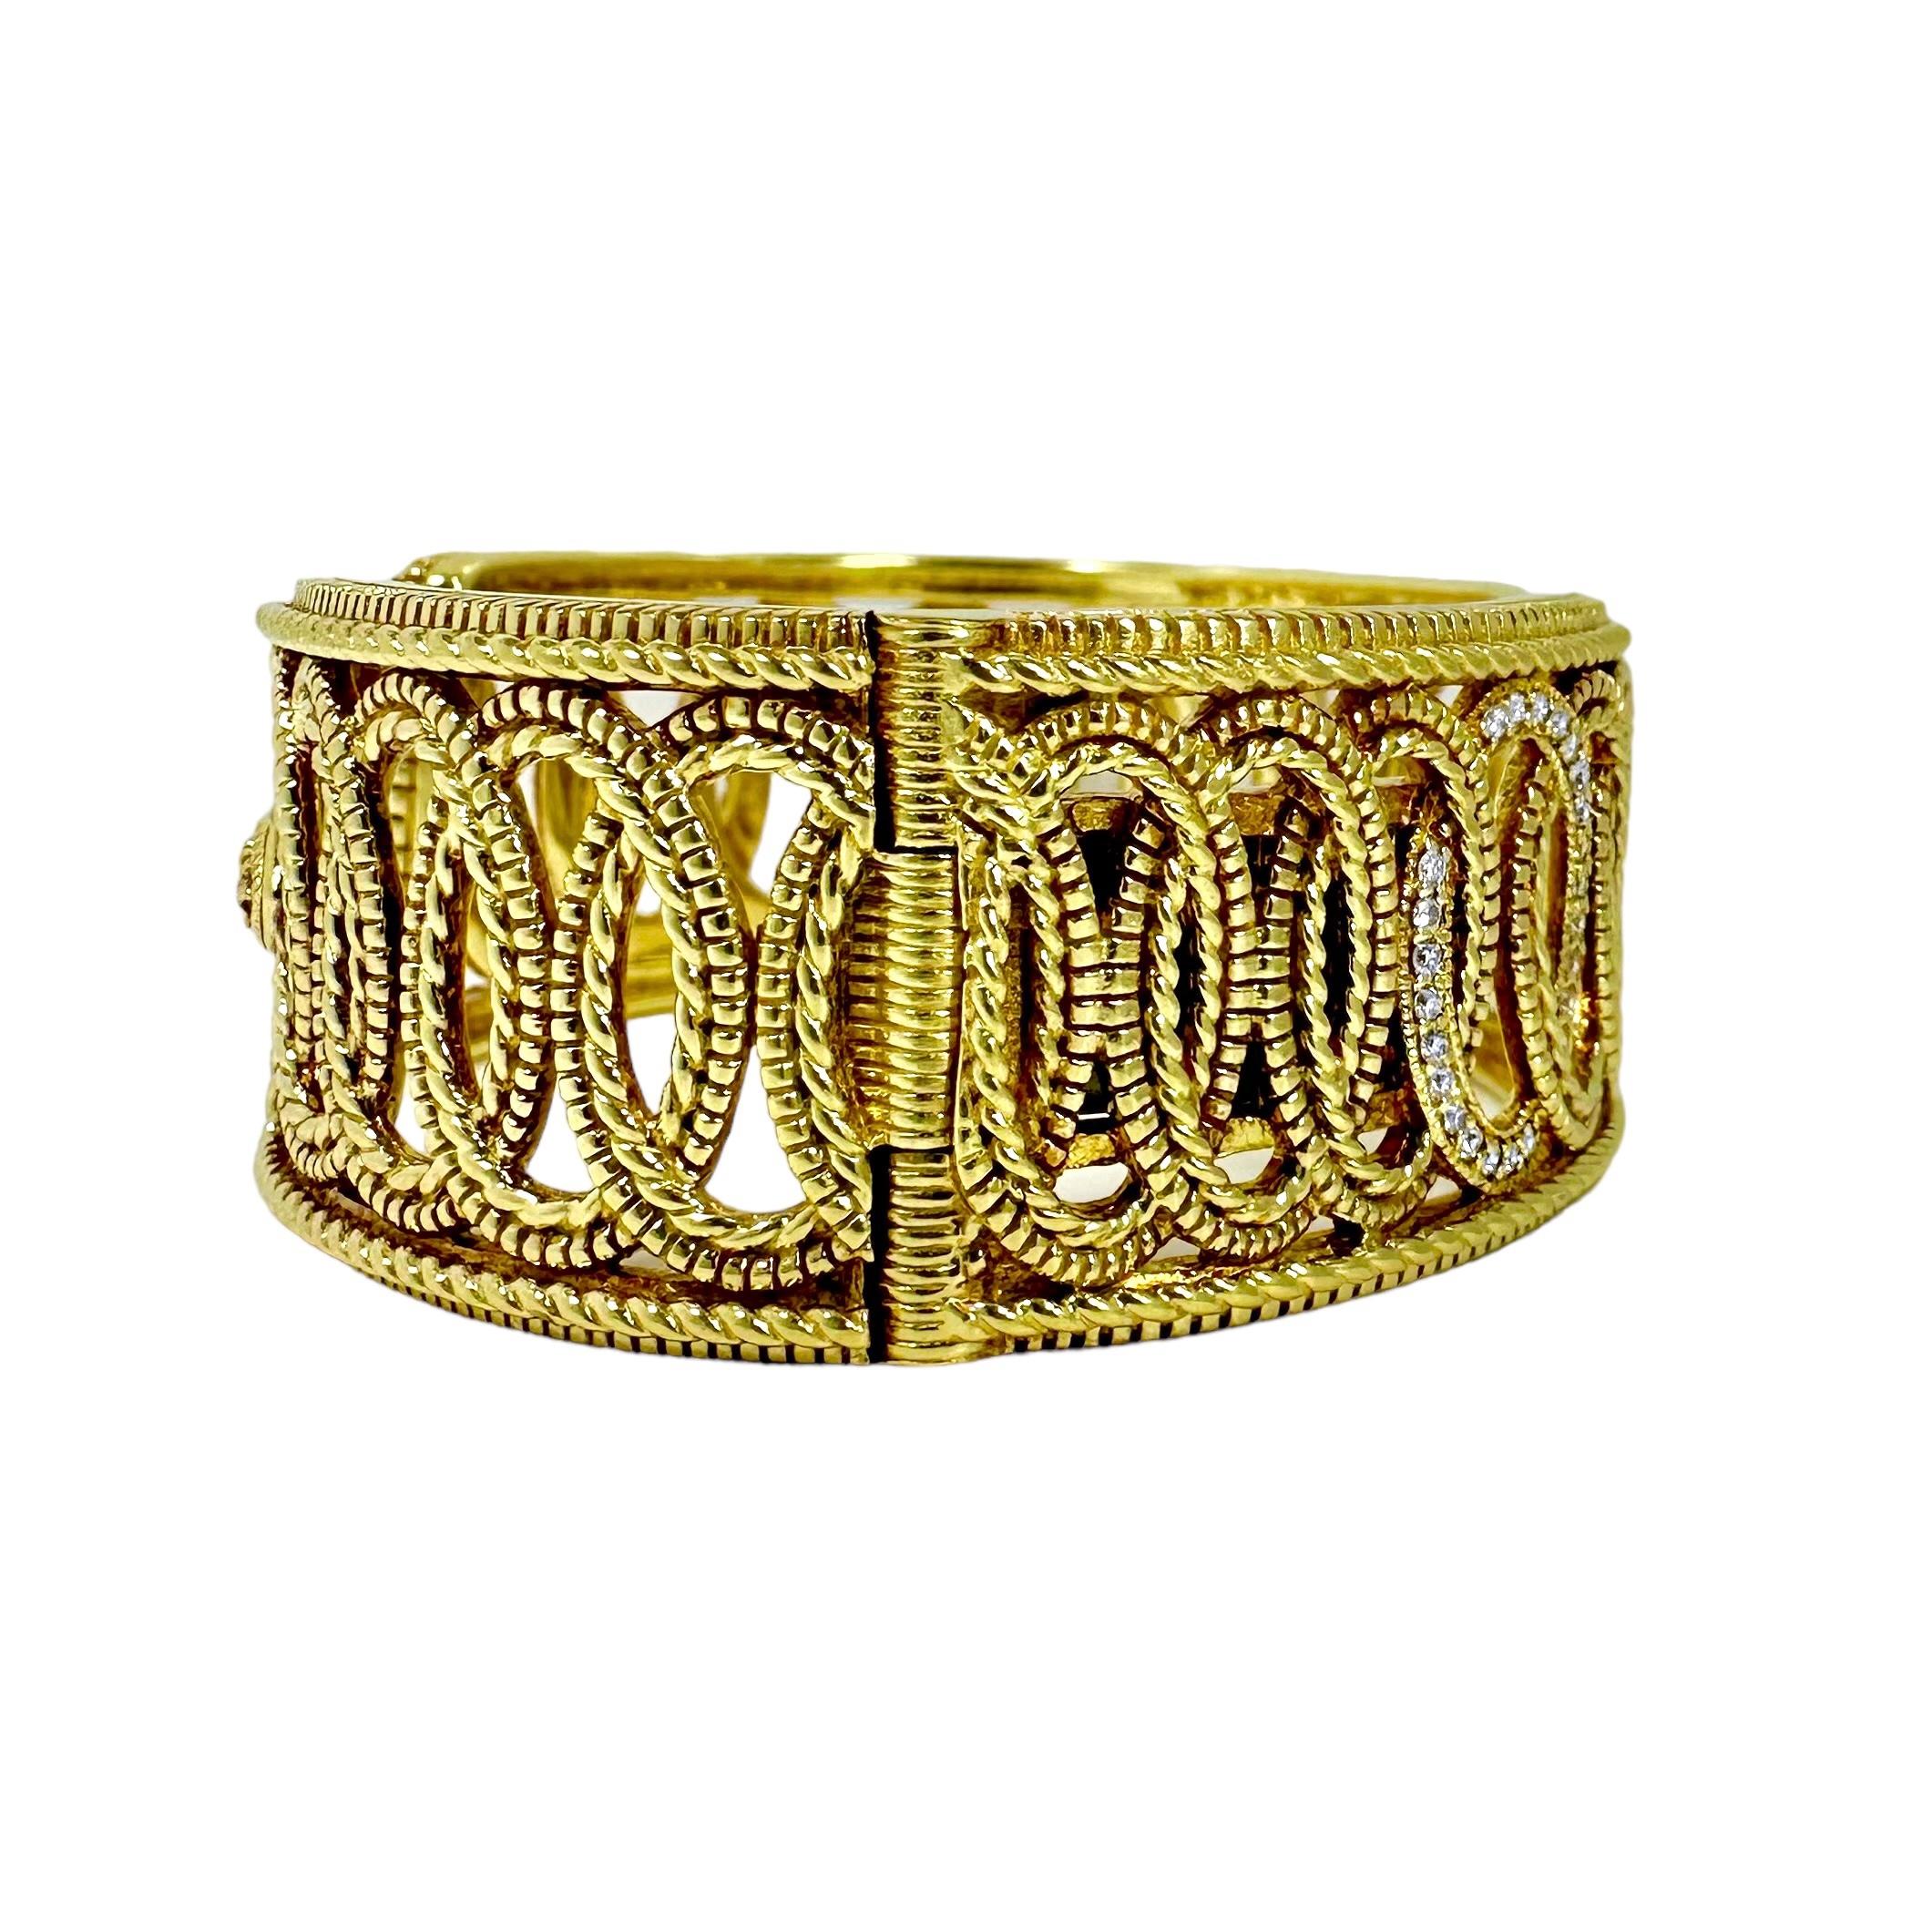 Casual Judith Ripka 18k Gold Hinged, Cuff Bracelet with Diamonds 7/8 inch Wide  1